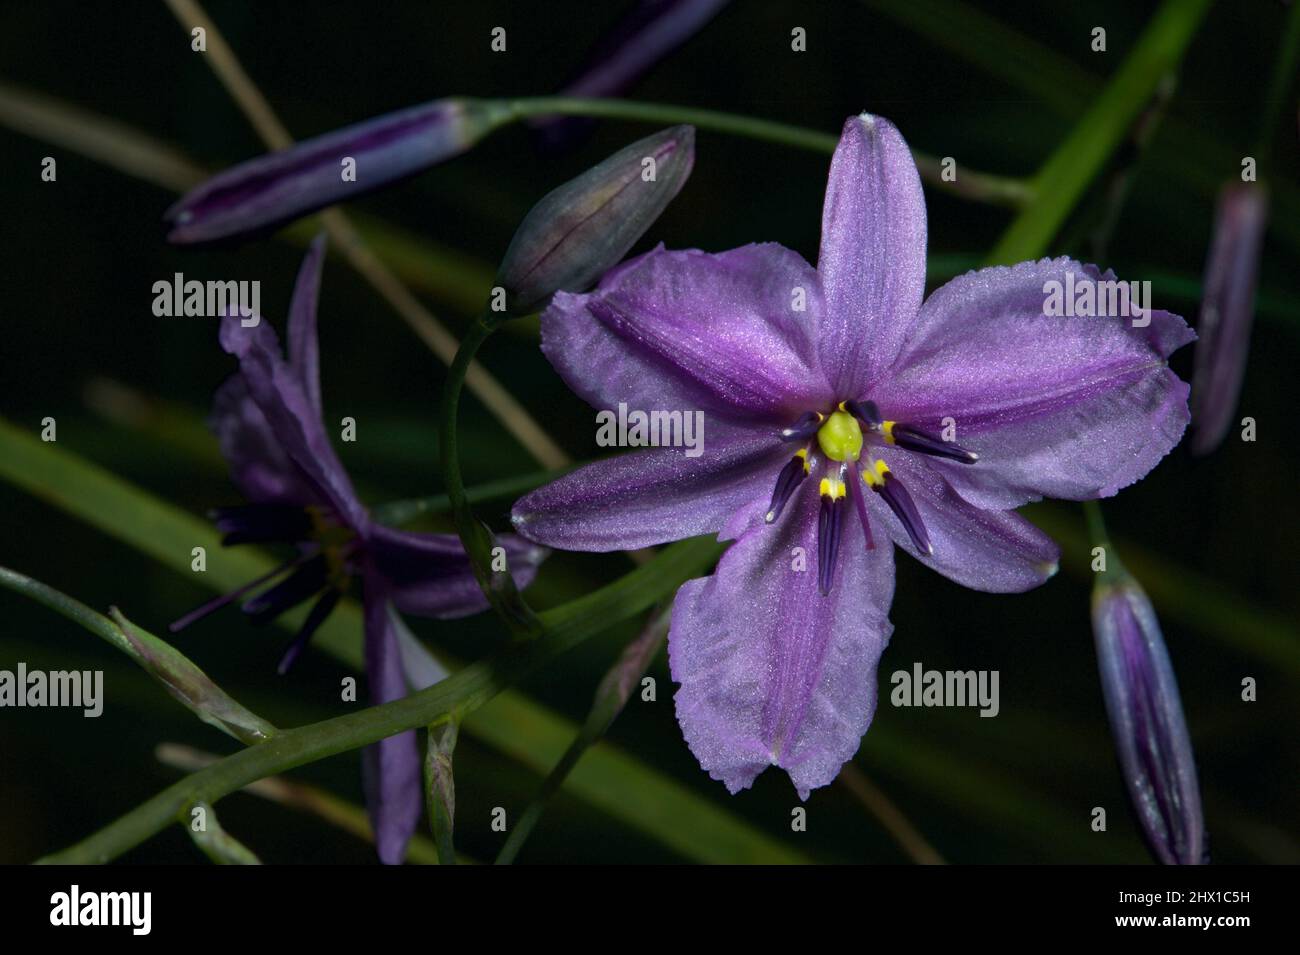 Chocolate Lillies (Arthropodium Strictum) bear no resemblance to chocolate - but get their name from the faint scent of chocolate they emit. Stock Photo